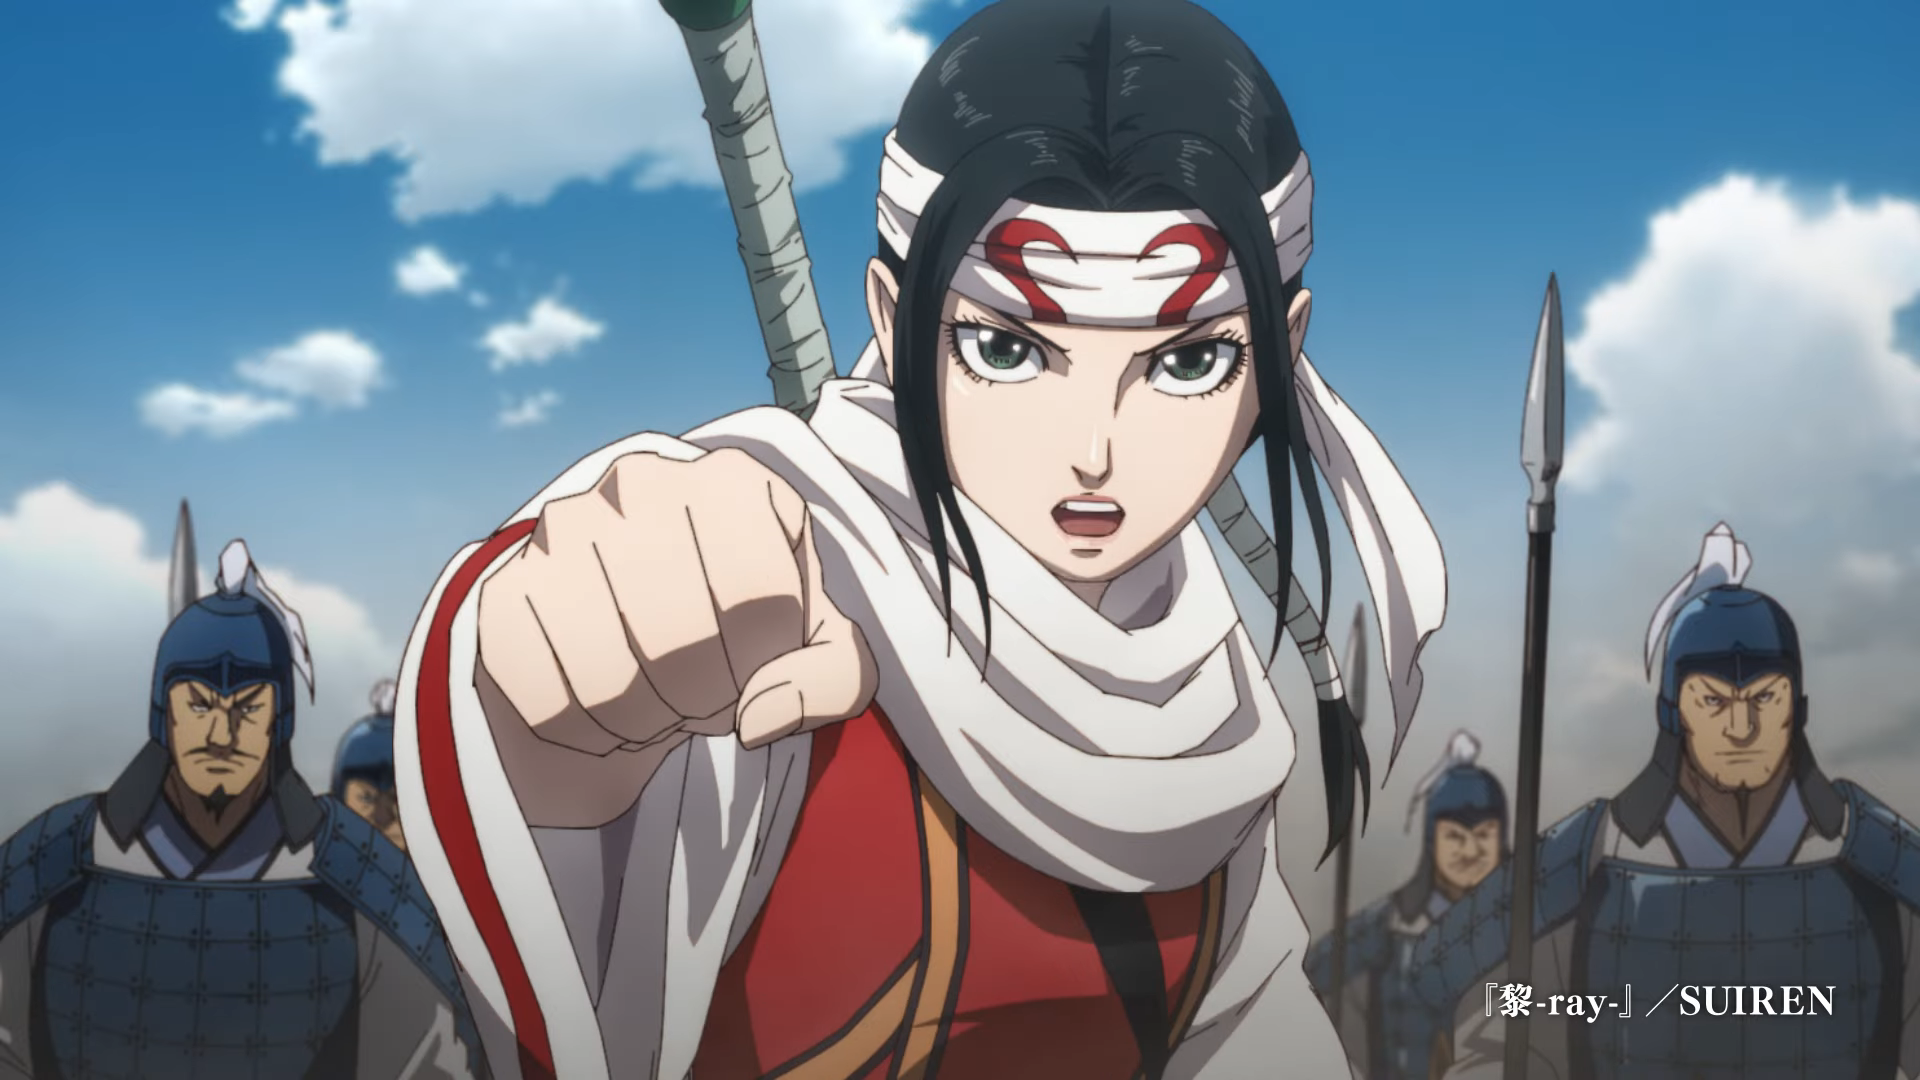 Kingdom Season 4 Gets Official Trailer Featuring Opening Theme Song